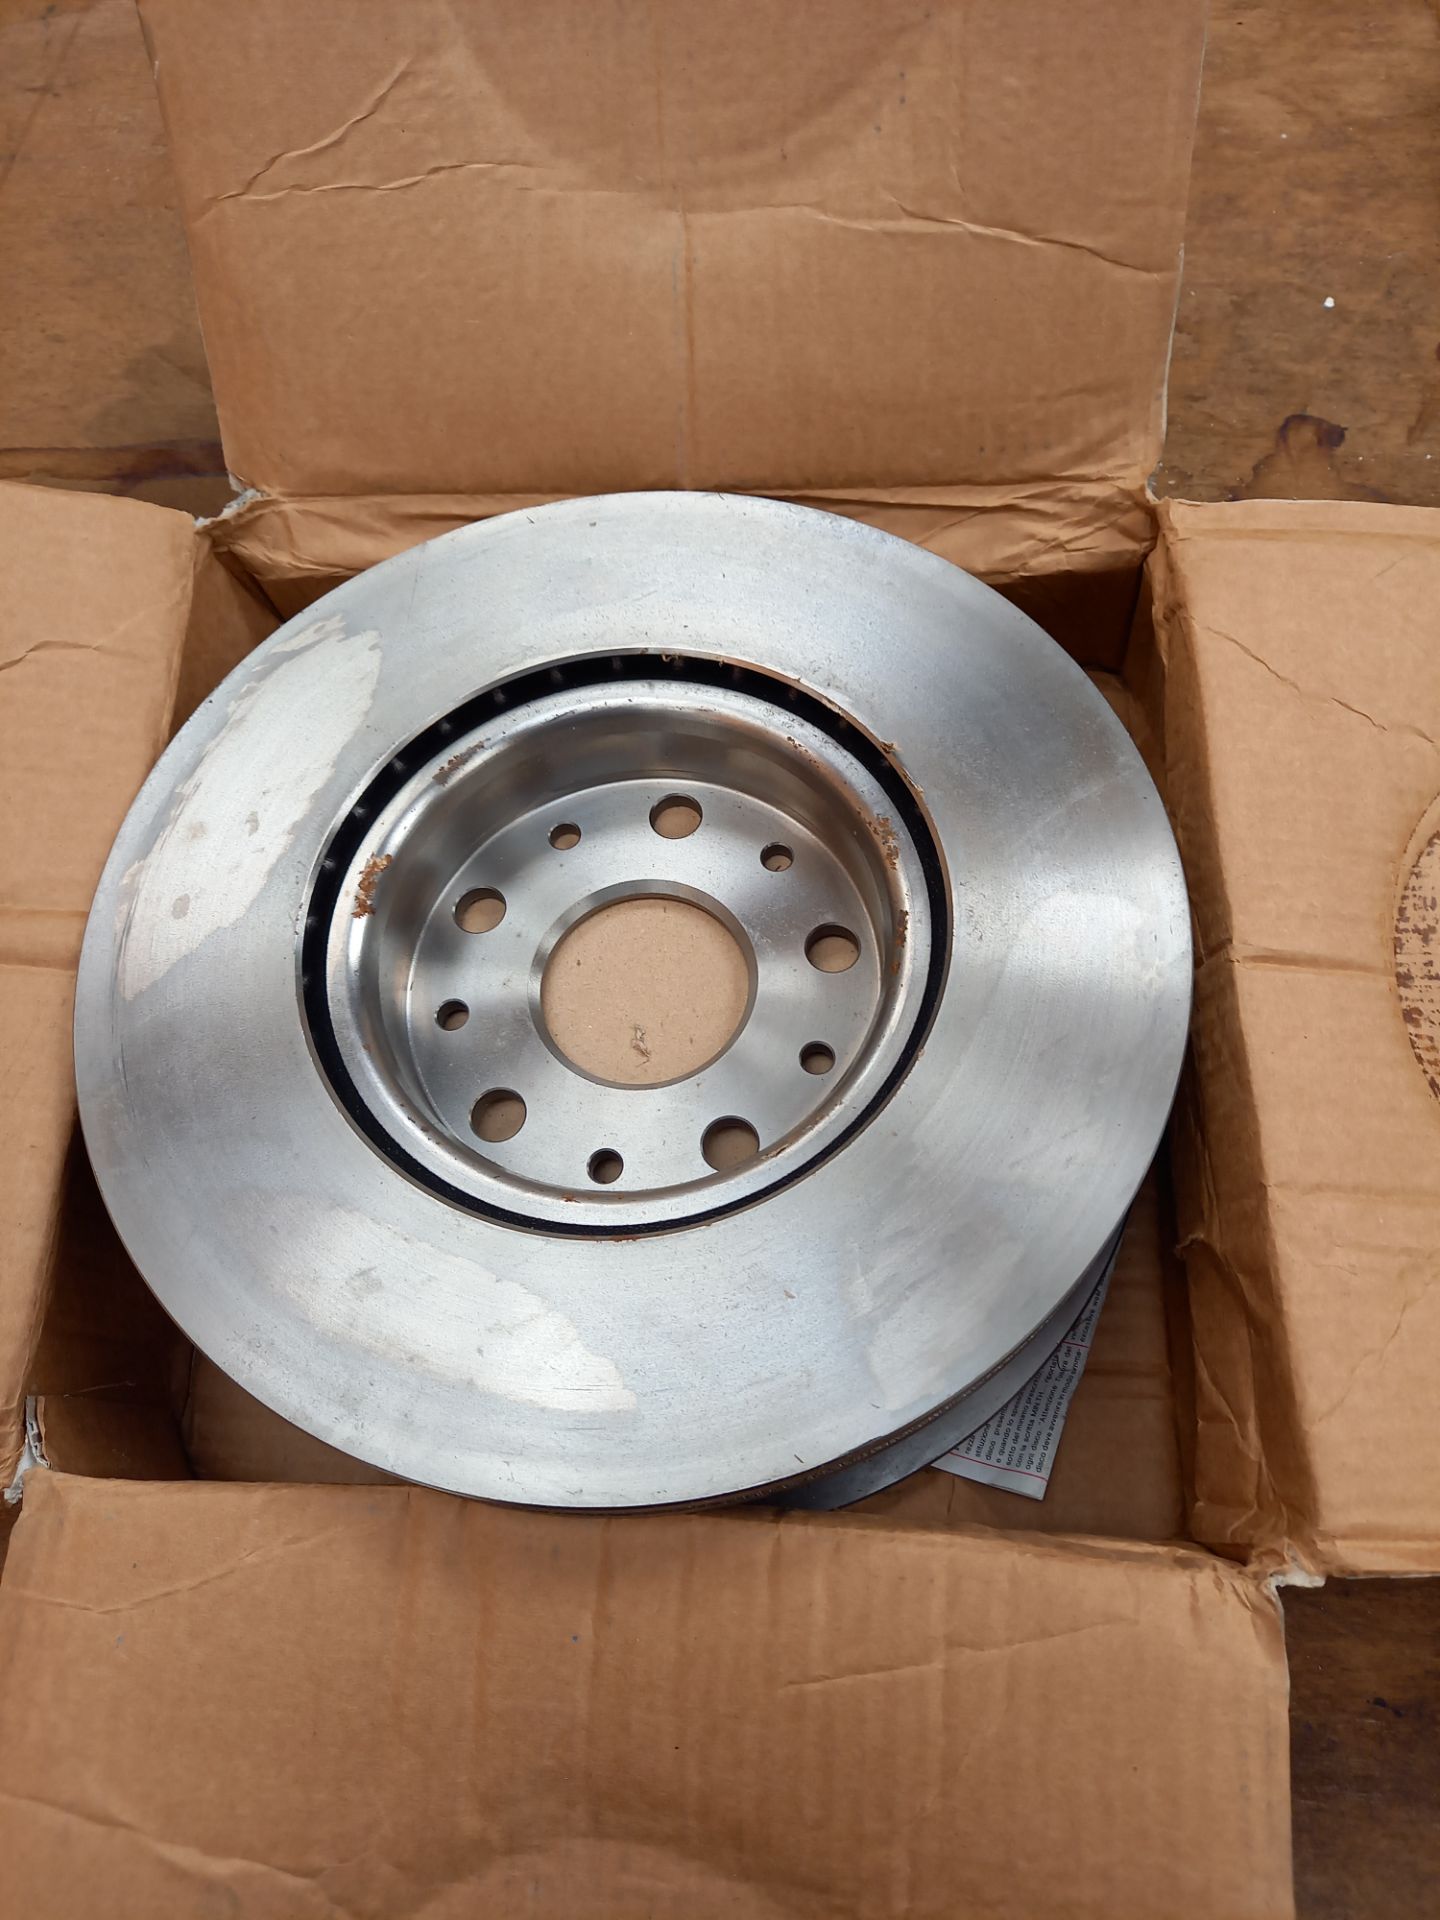 54 X FIAT + ALFA ROMEO FRONT + REAR BRAKE DISCS + PADS STARTING PRICE IS THE RESERVE PRICE - Image 4 of 7